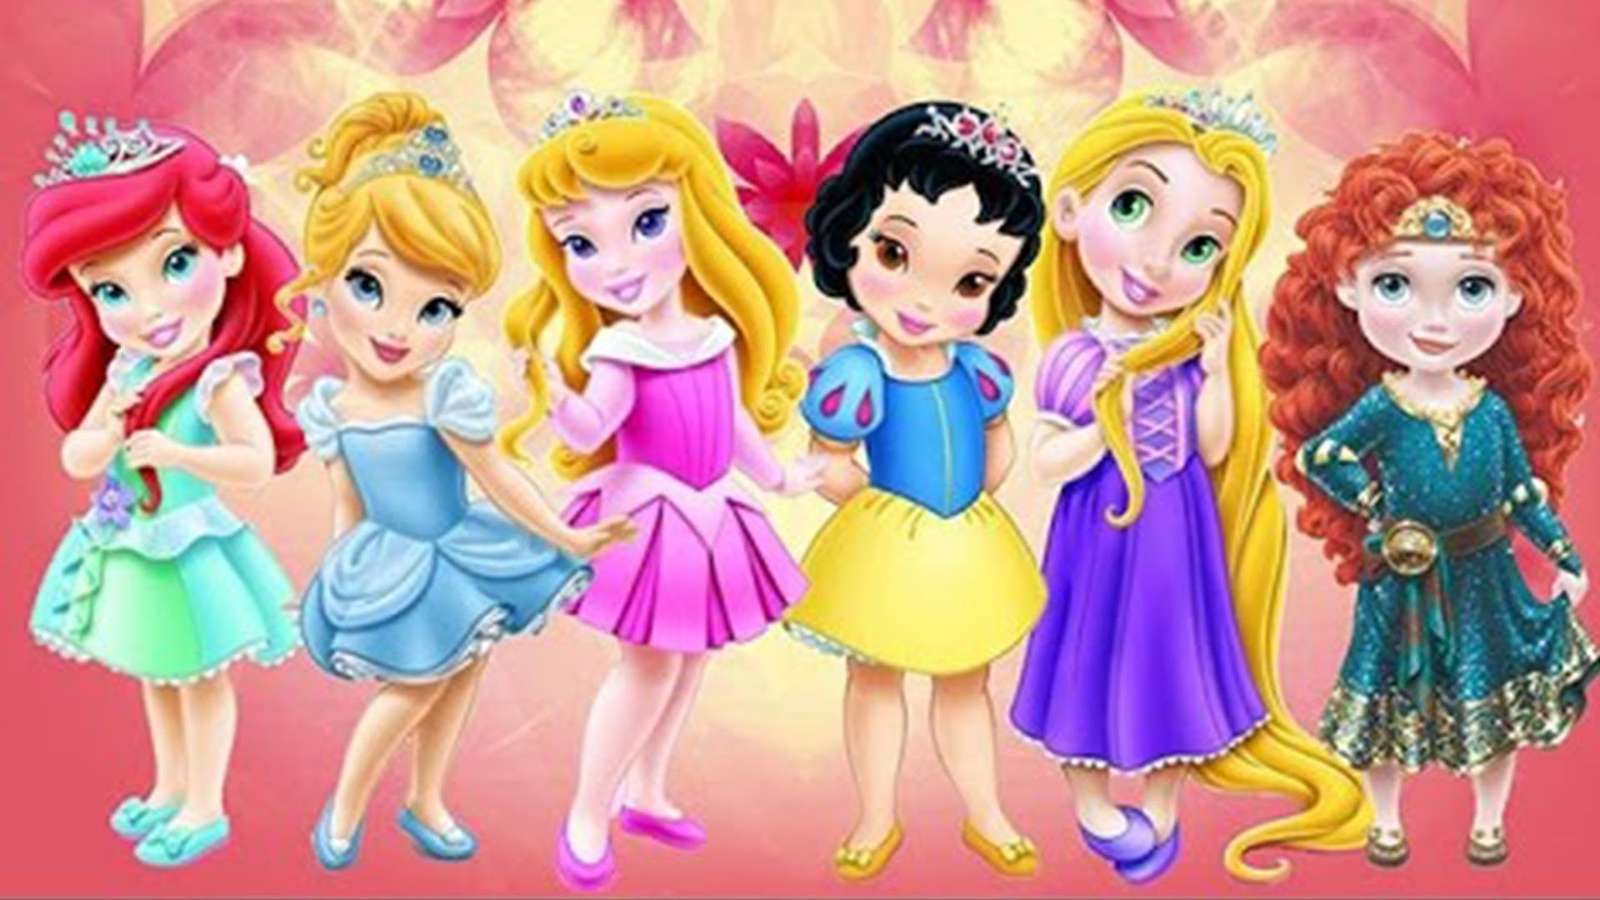 Small Princess Wallpapers - Wallpaper Cave puzzle online